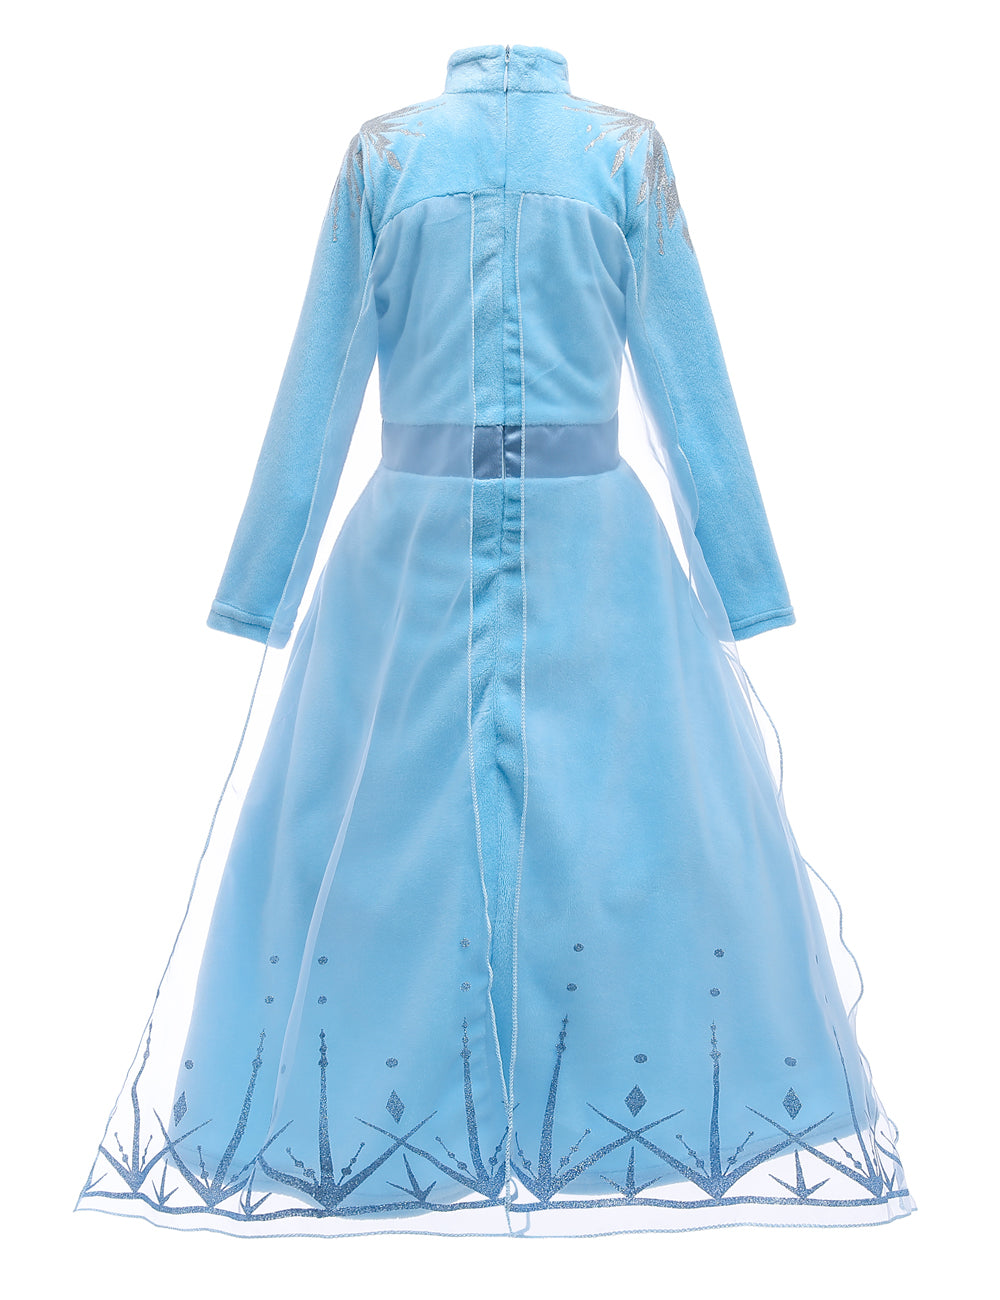 Frozen Elsa Dress for Toddlers and Kids, Blue Long Sleeve